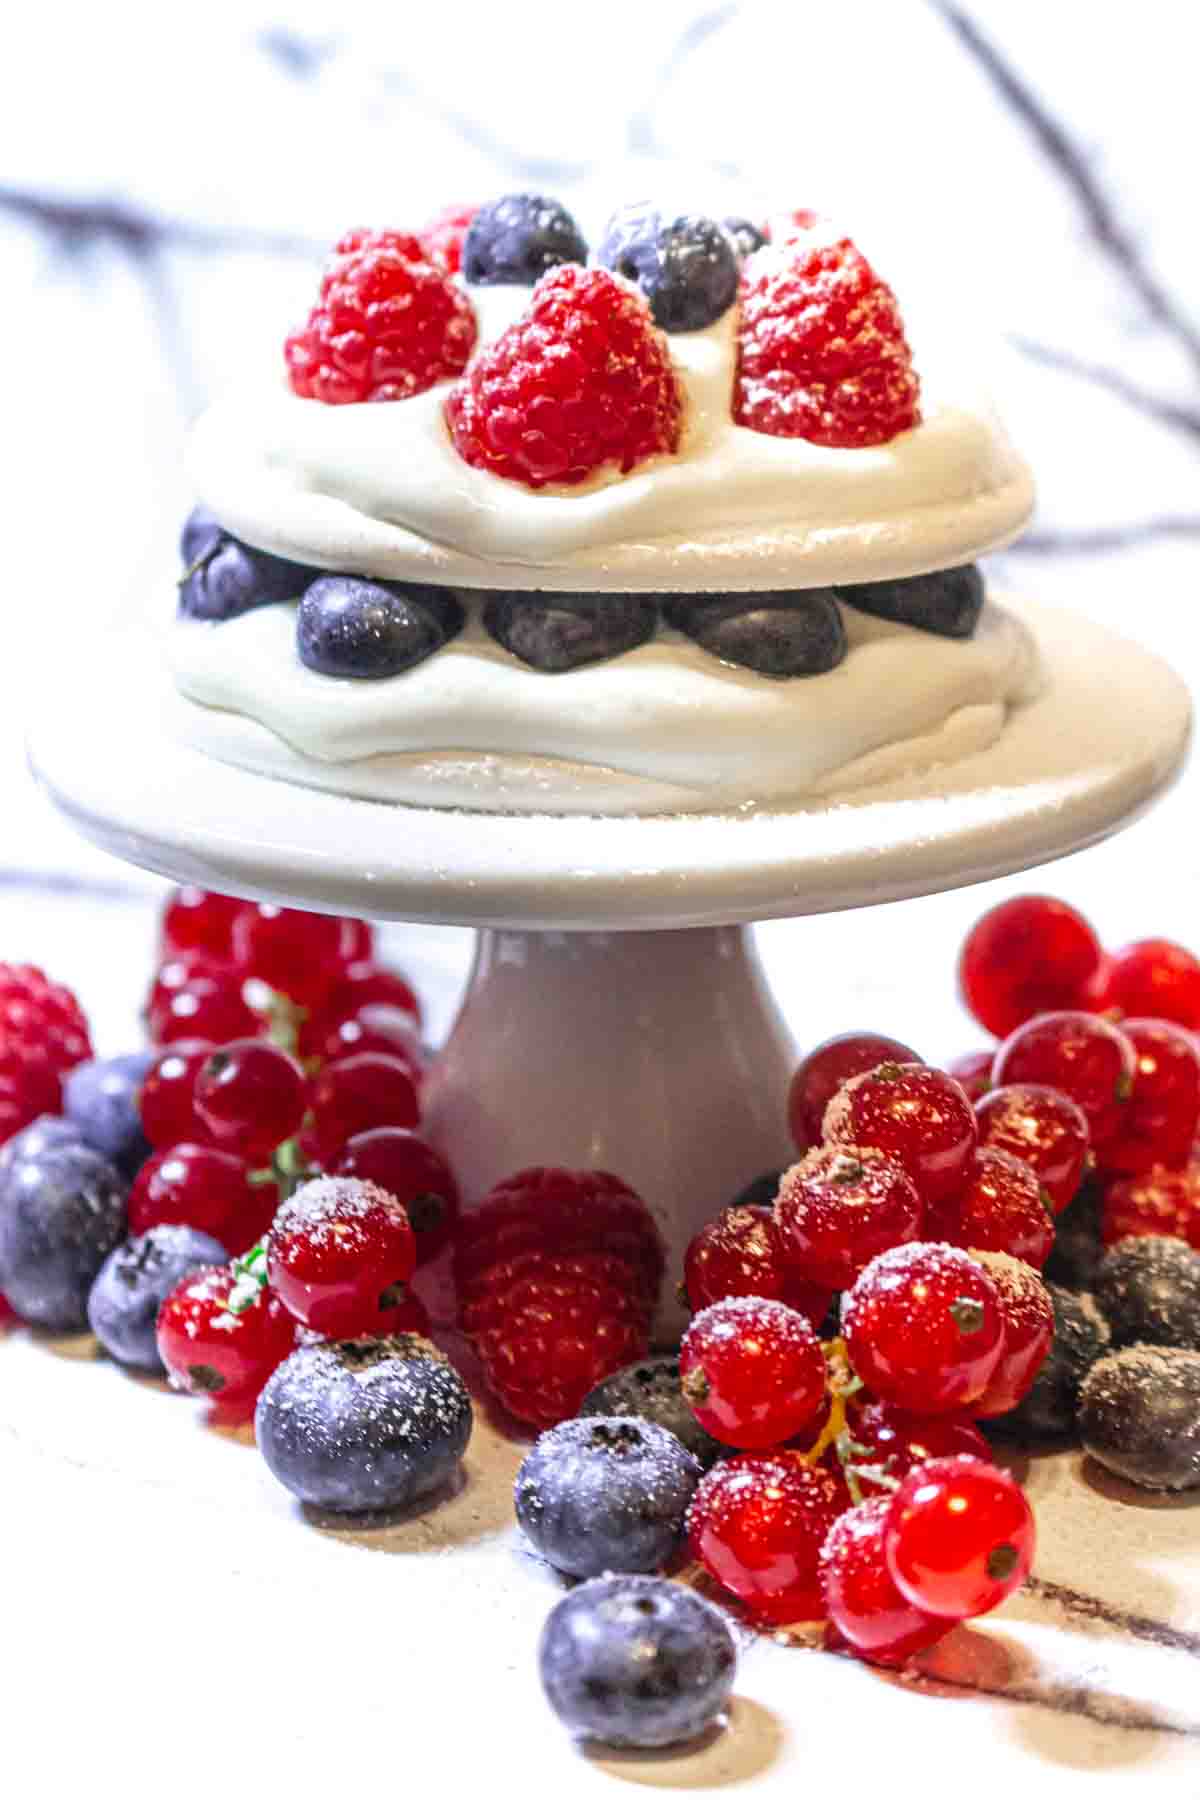 A cake topped with berries and whipped cream.